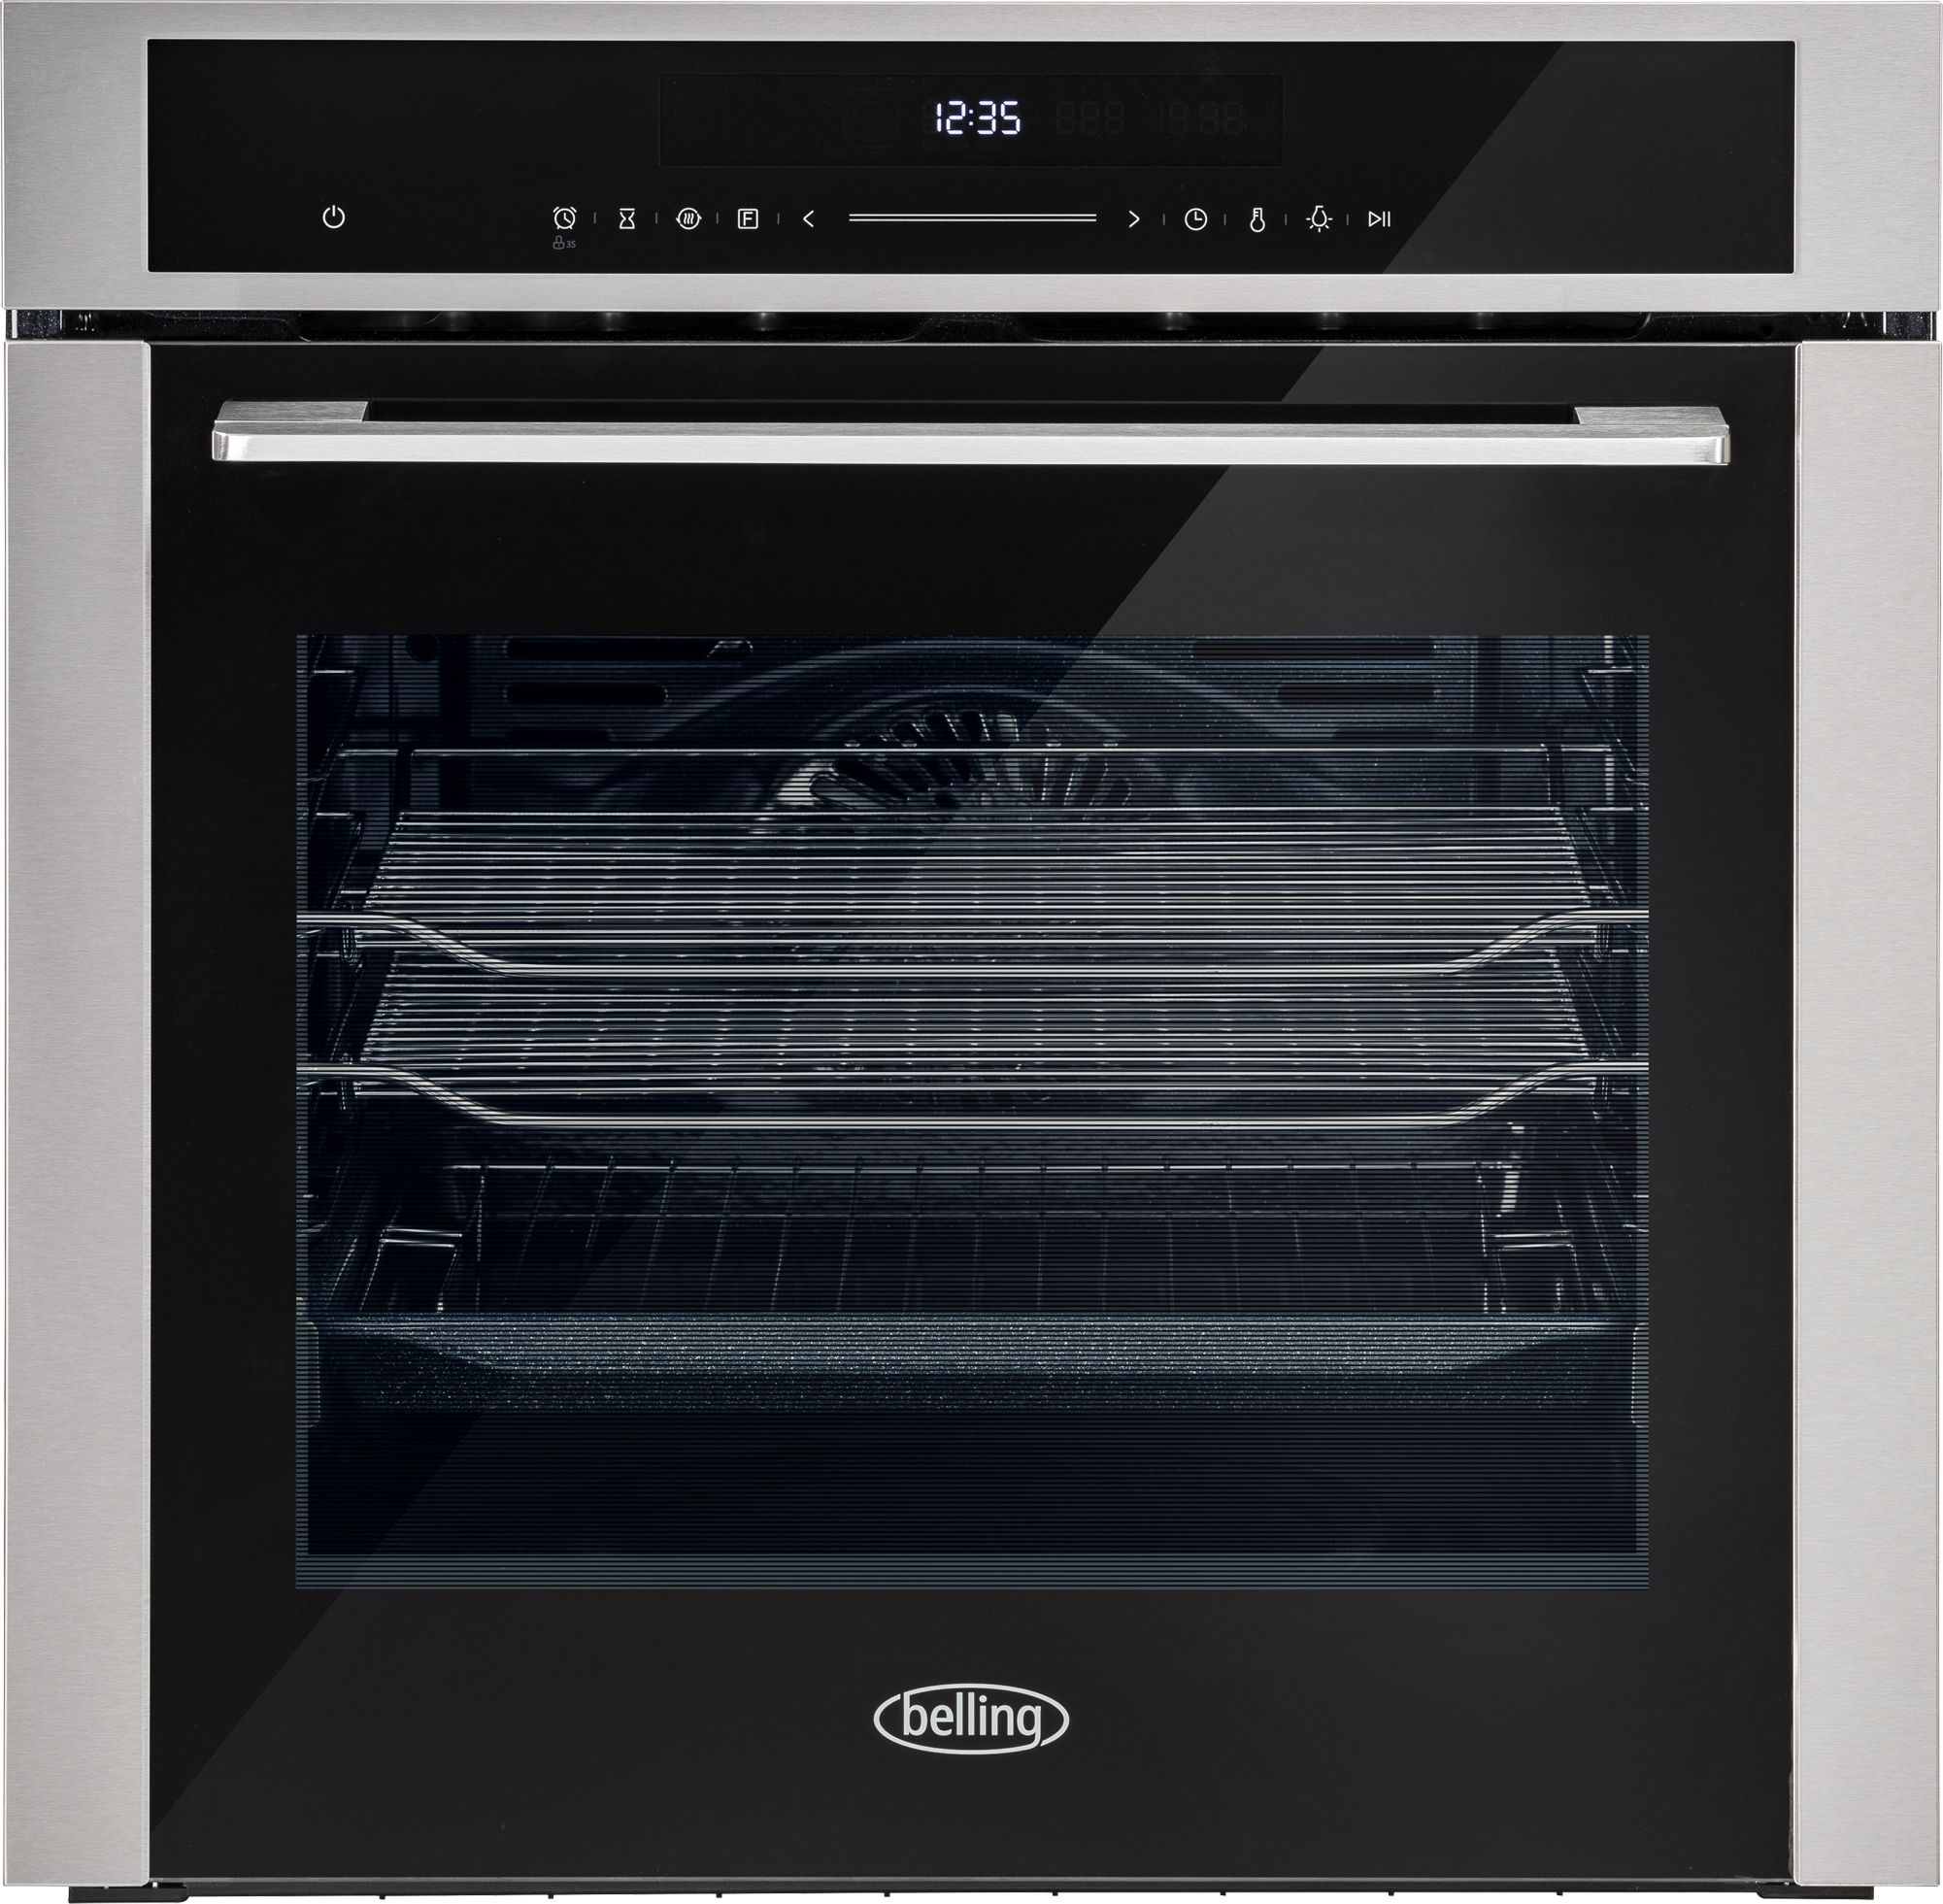 Belling ComfortCook BEL BI603MFPY STA Built In Electric Single Oven with Pyrolytic Cleaning - Stainless Steel - A+ Rated, Stainless Steel